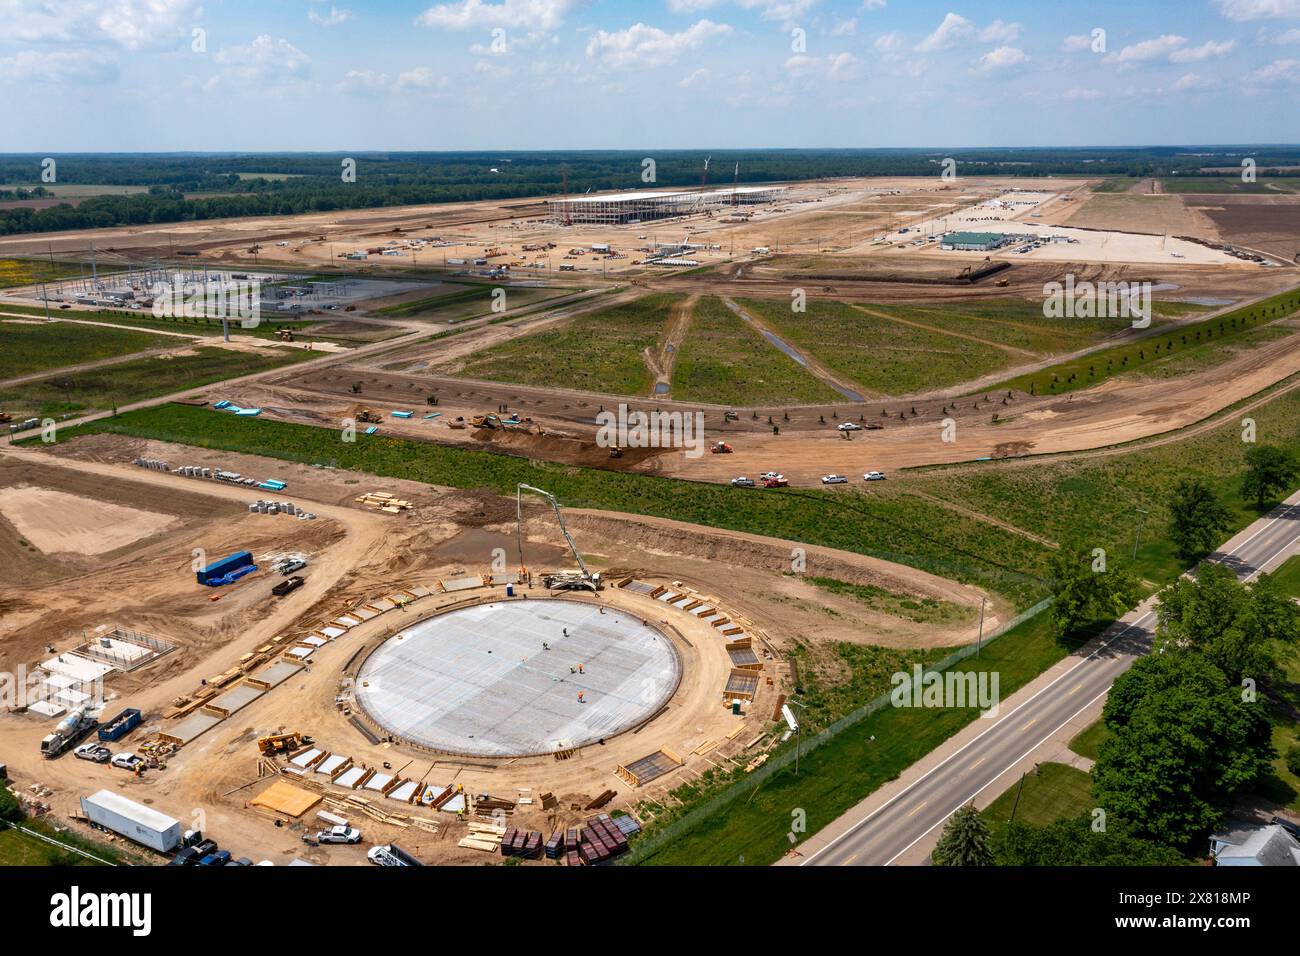 Marshall, Michigan - Construction of Ford's electric vehicle battery plant at its BlueOval Battery Park. Ford says the plant will create 1700 jobs whe Stock Photo